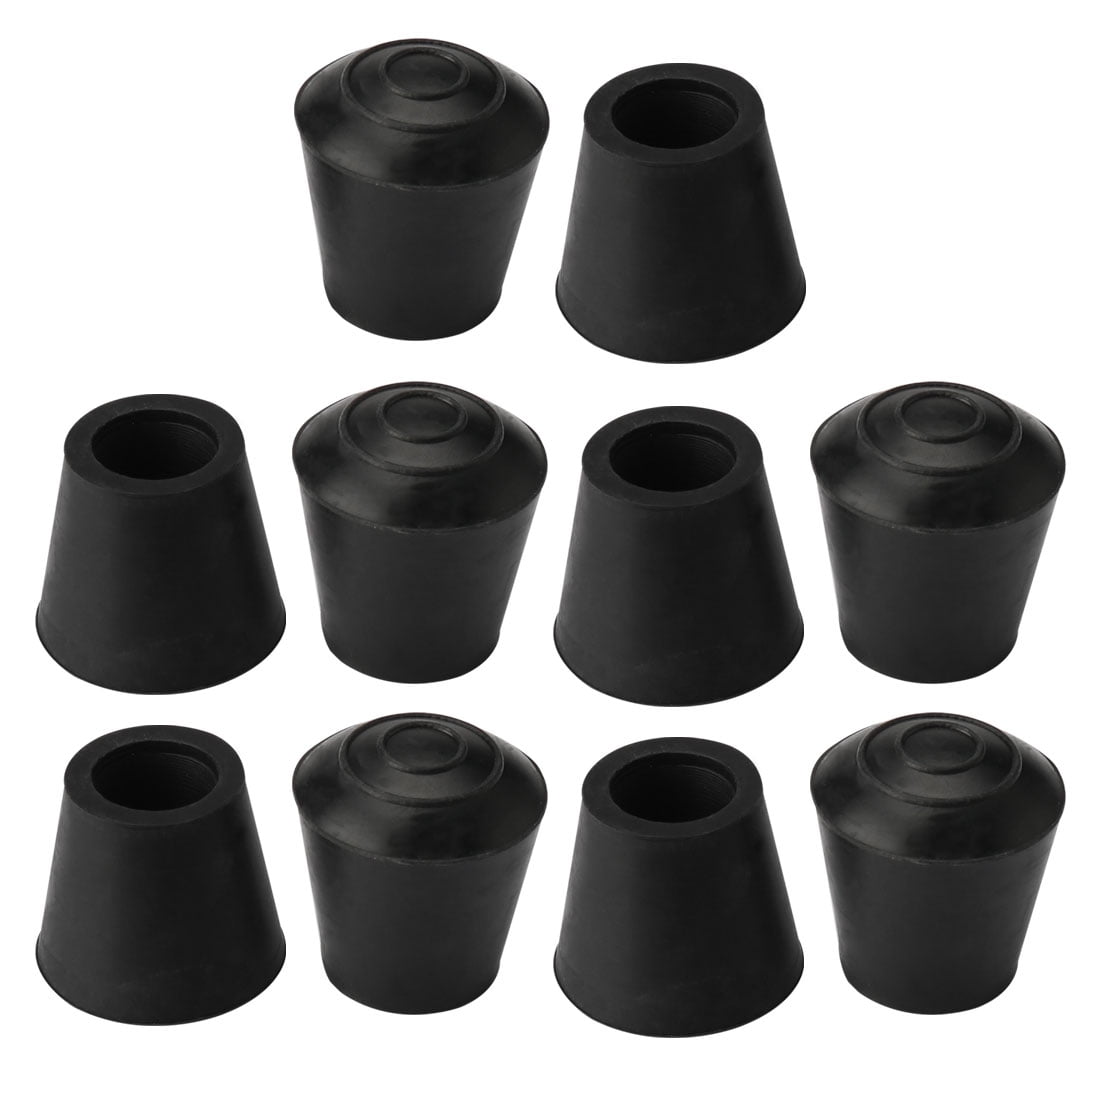 24Pcs Rubber Furniture Foot Table Chair Leg Tip Caps Covers Tips Floor Protector 